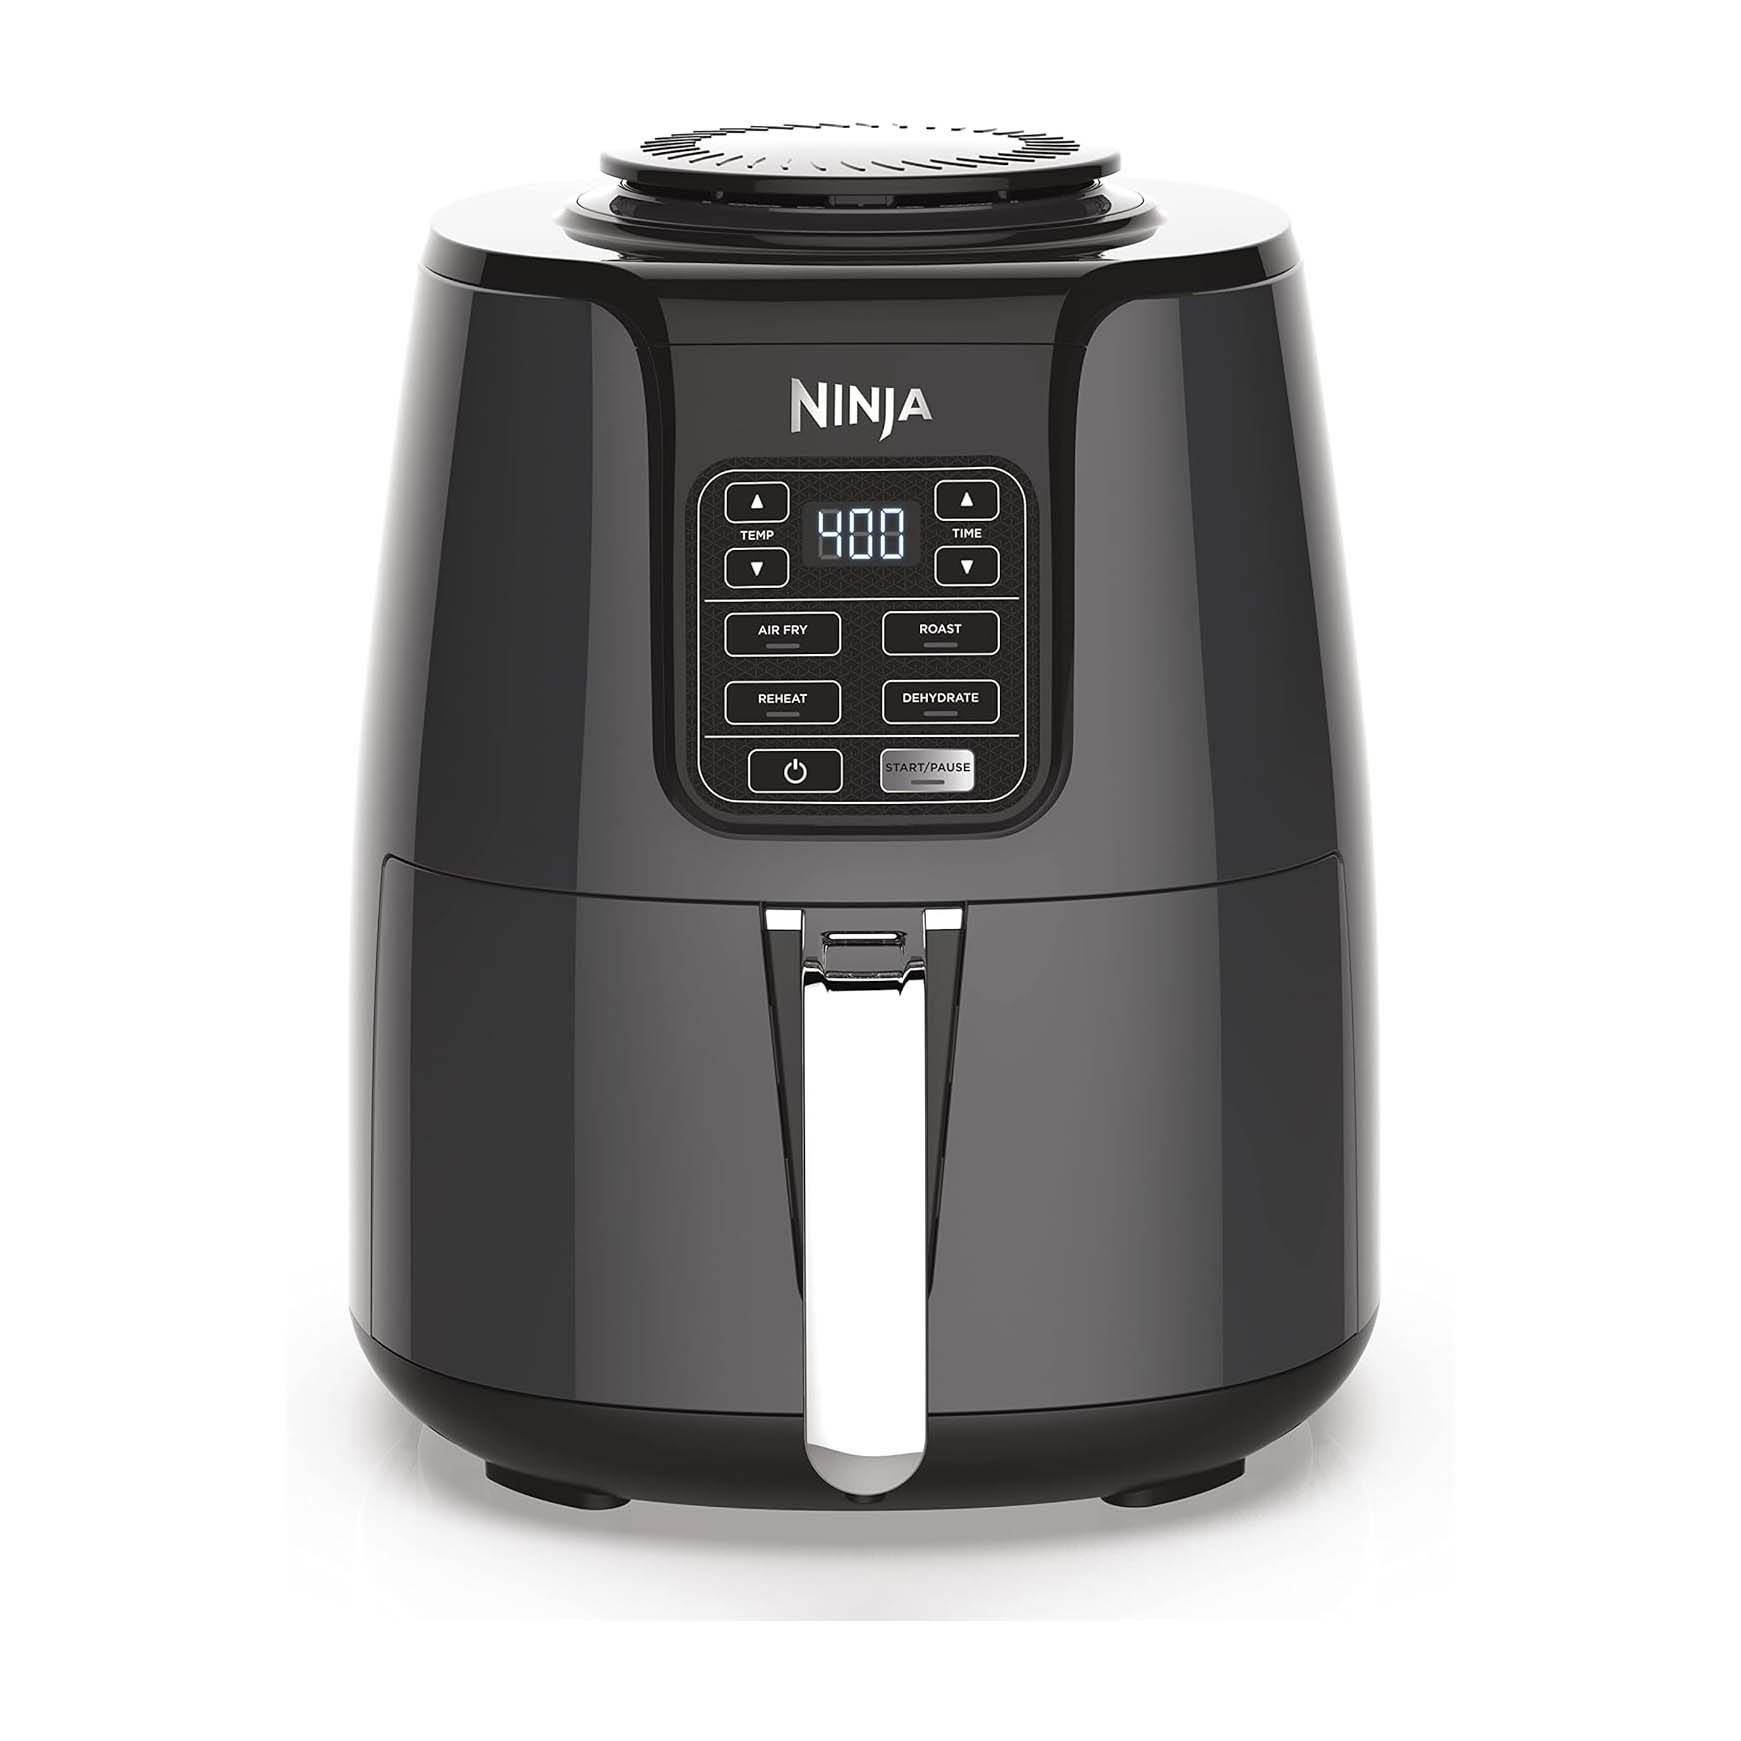 Ninja AF101 Air Fryer that Crisps, Roasts, Reheats, & Dehydrates, for Quick, Easy Meals in gray